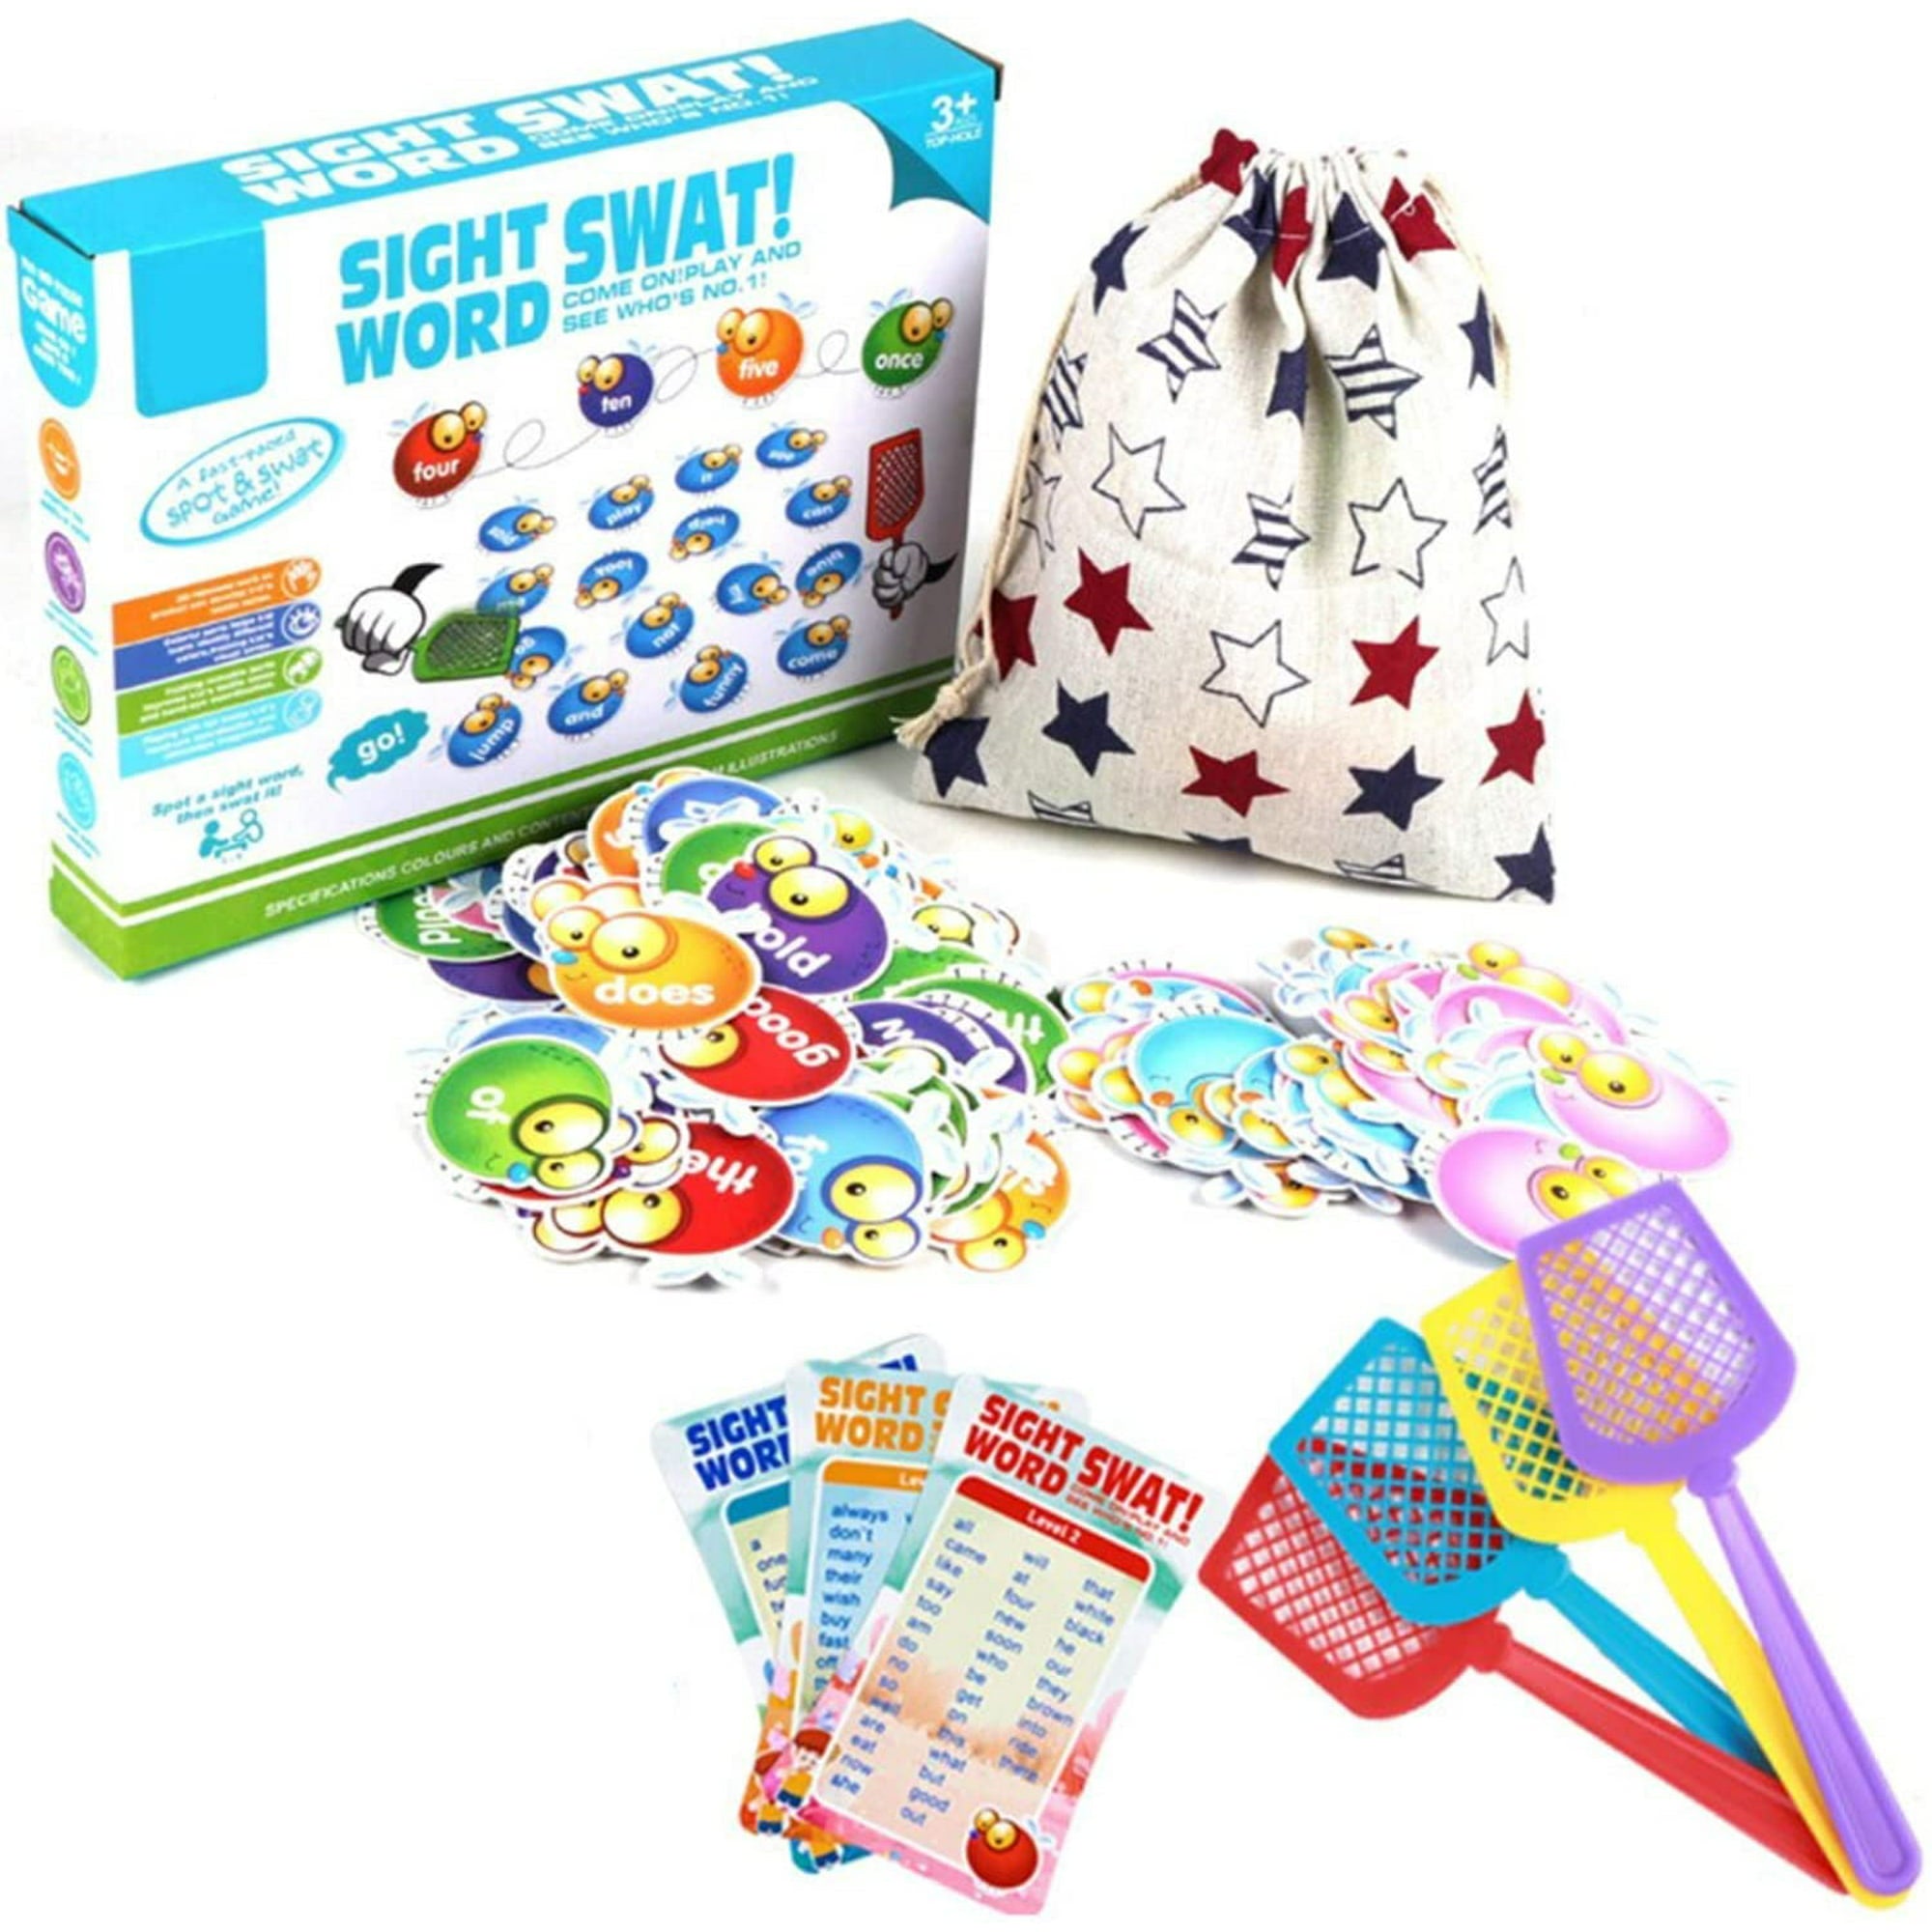 Junipel Hours of Fun Time Learning with Sight Words Swat Game Set for Kids